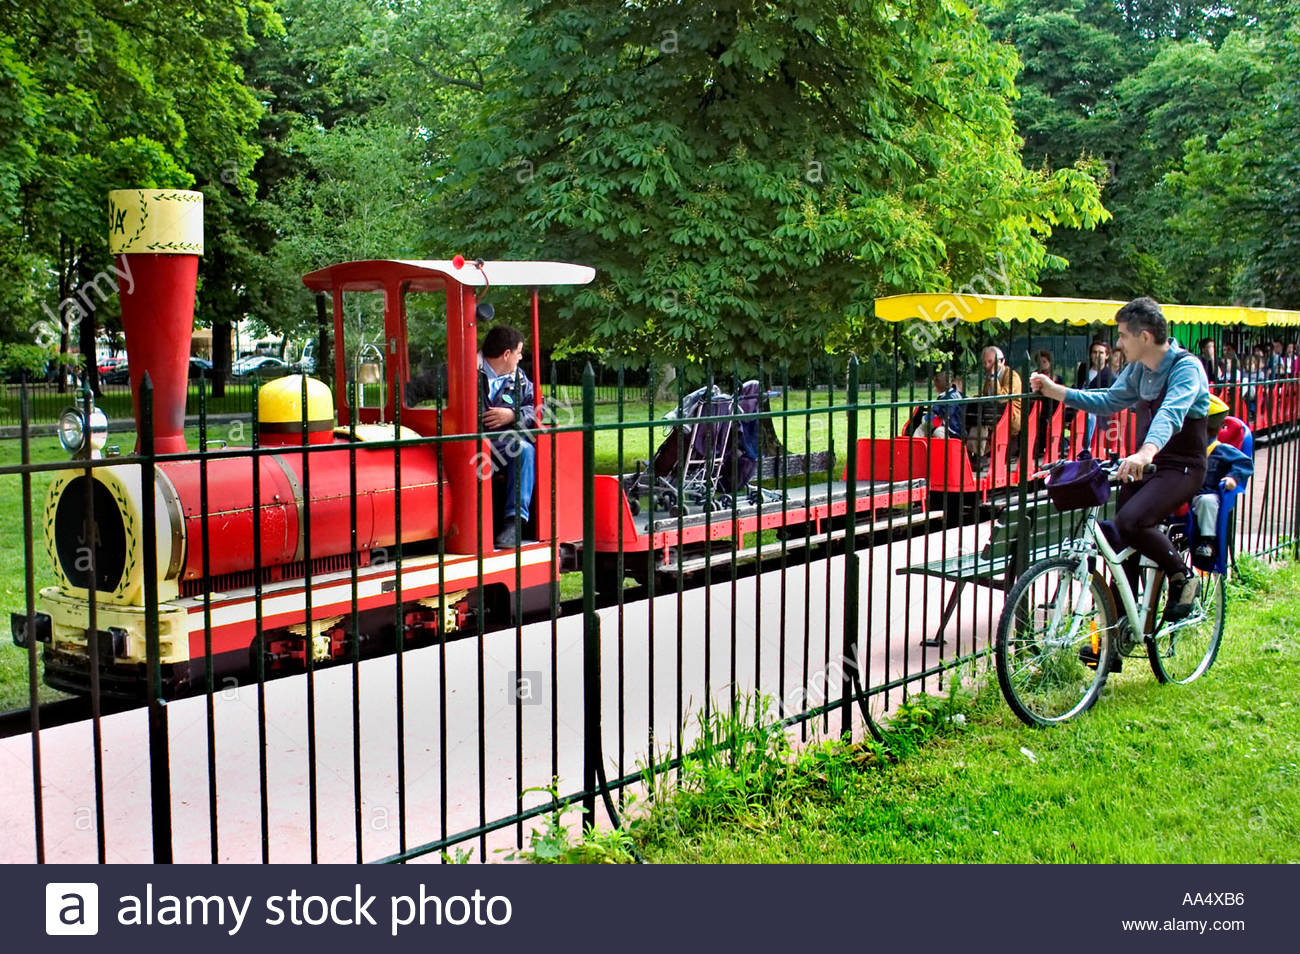 paris france urban playground parks people miniature train ride in AA4XB6